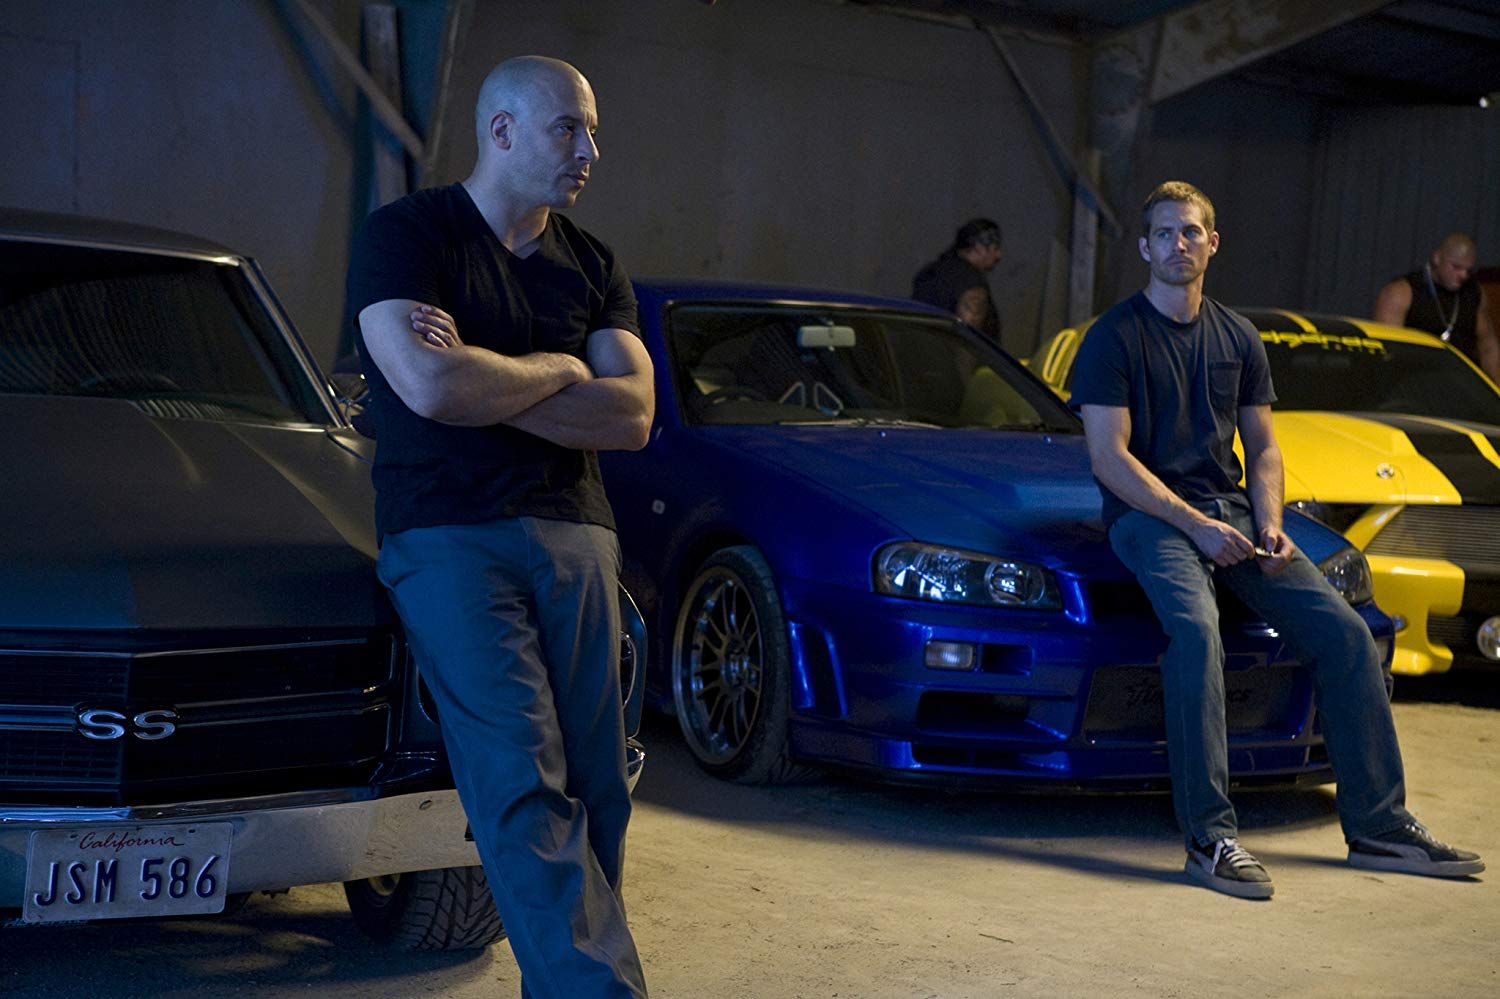 The Definitive Ranking Of All The Fast/Furious Movies (Including F9)